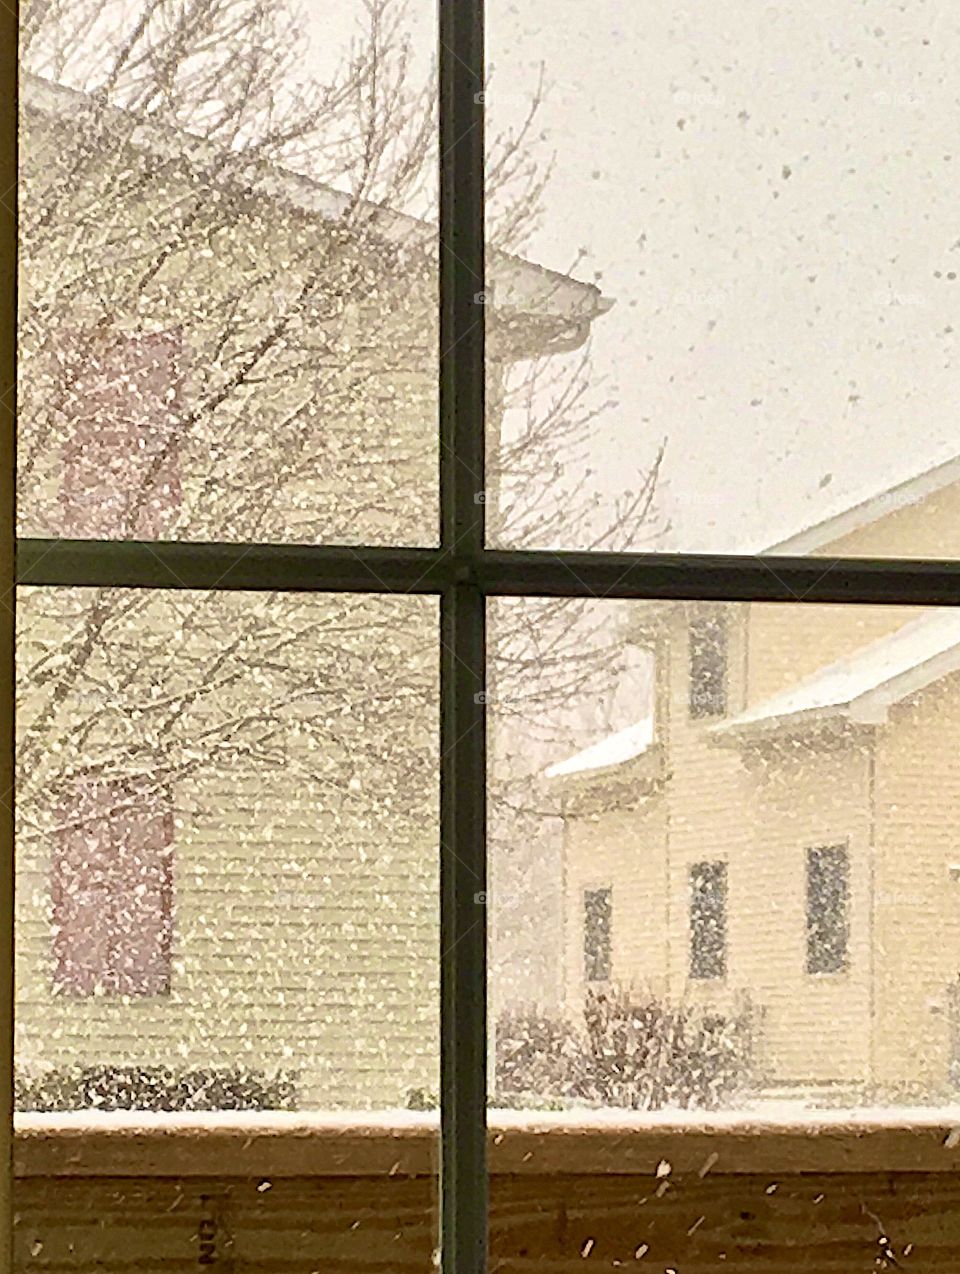 Pouring snow in urban area through glass pane window facing apartment units in winter